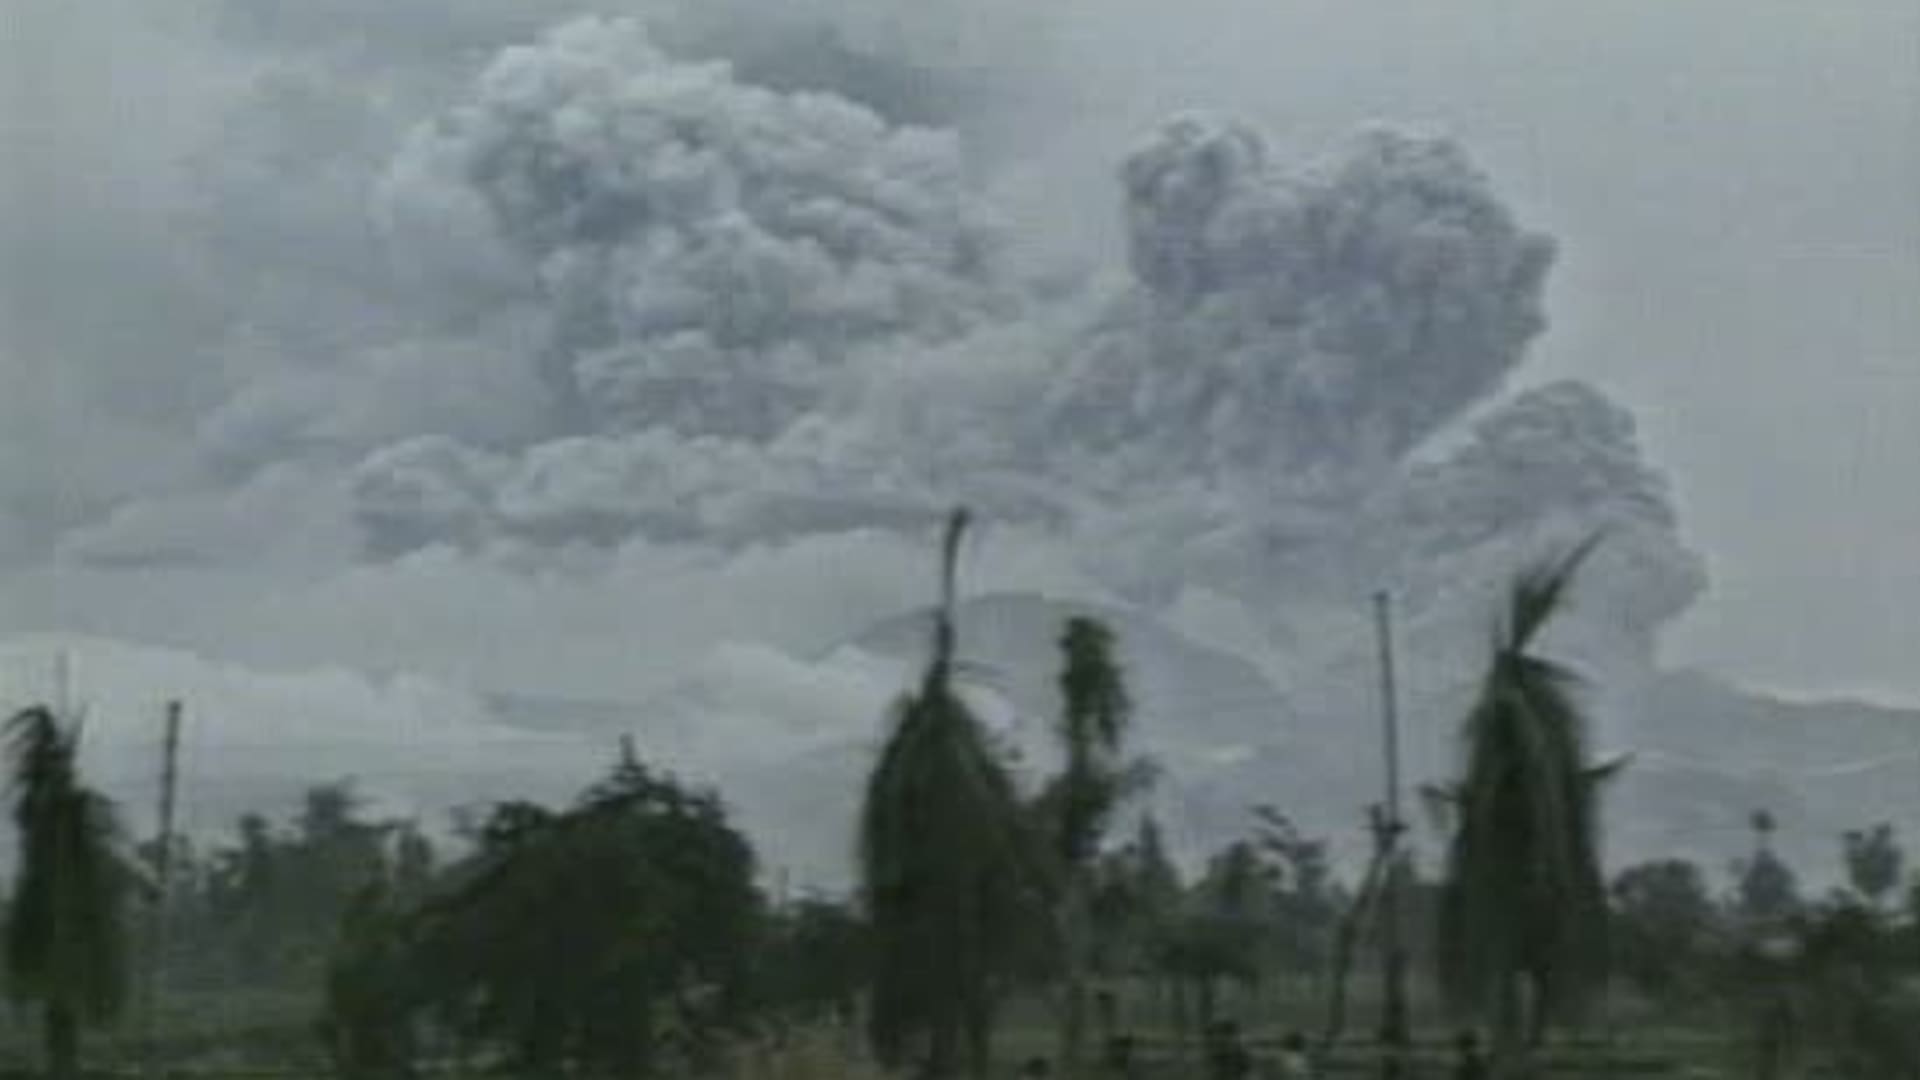 The eruption of Mt. Pinatubo in the Philippines, 1991.